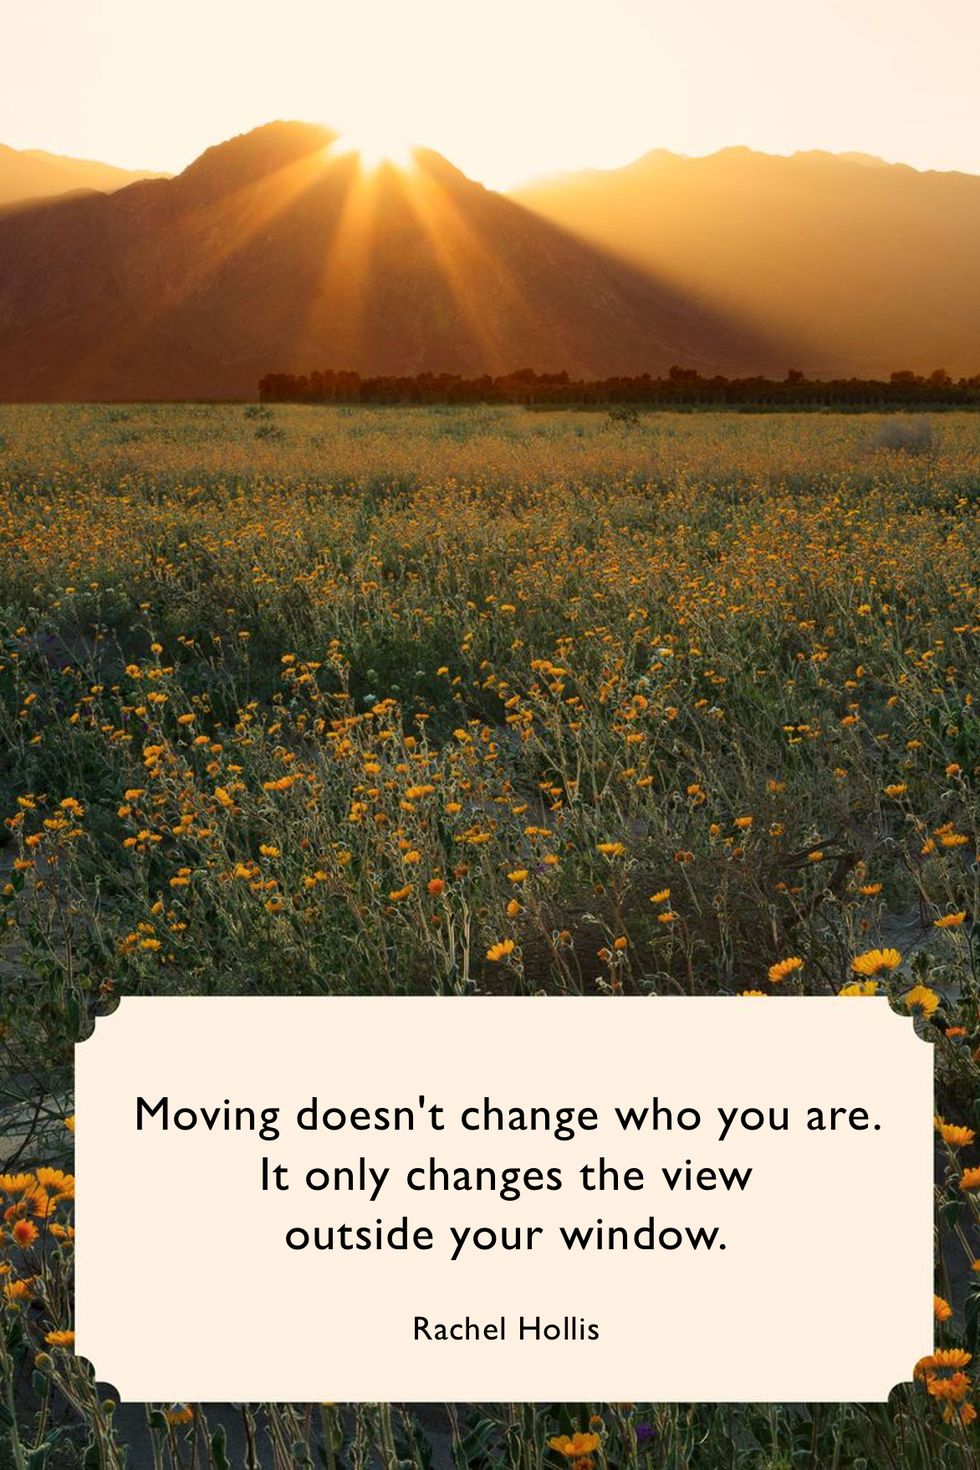 41 Best Quotes About Change - Inspiring Sayings to Navigate Life